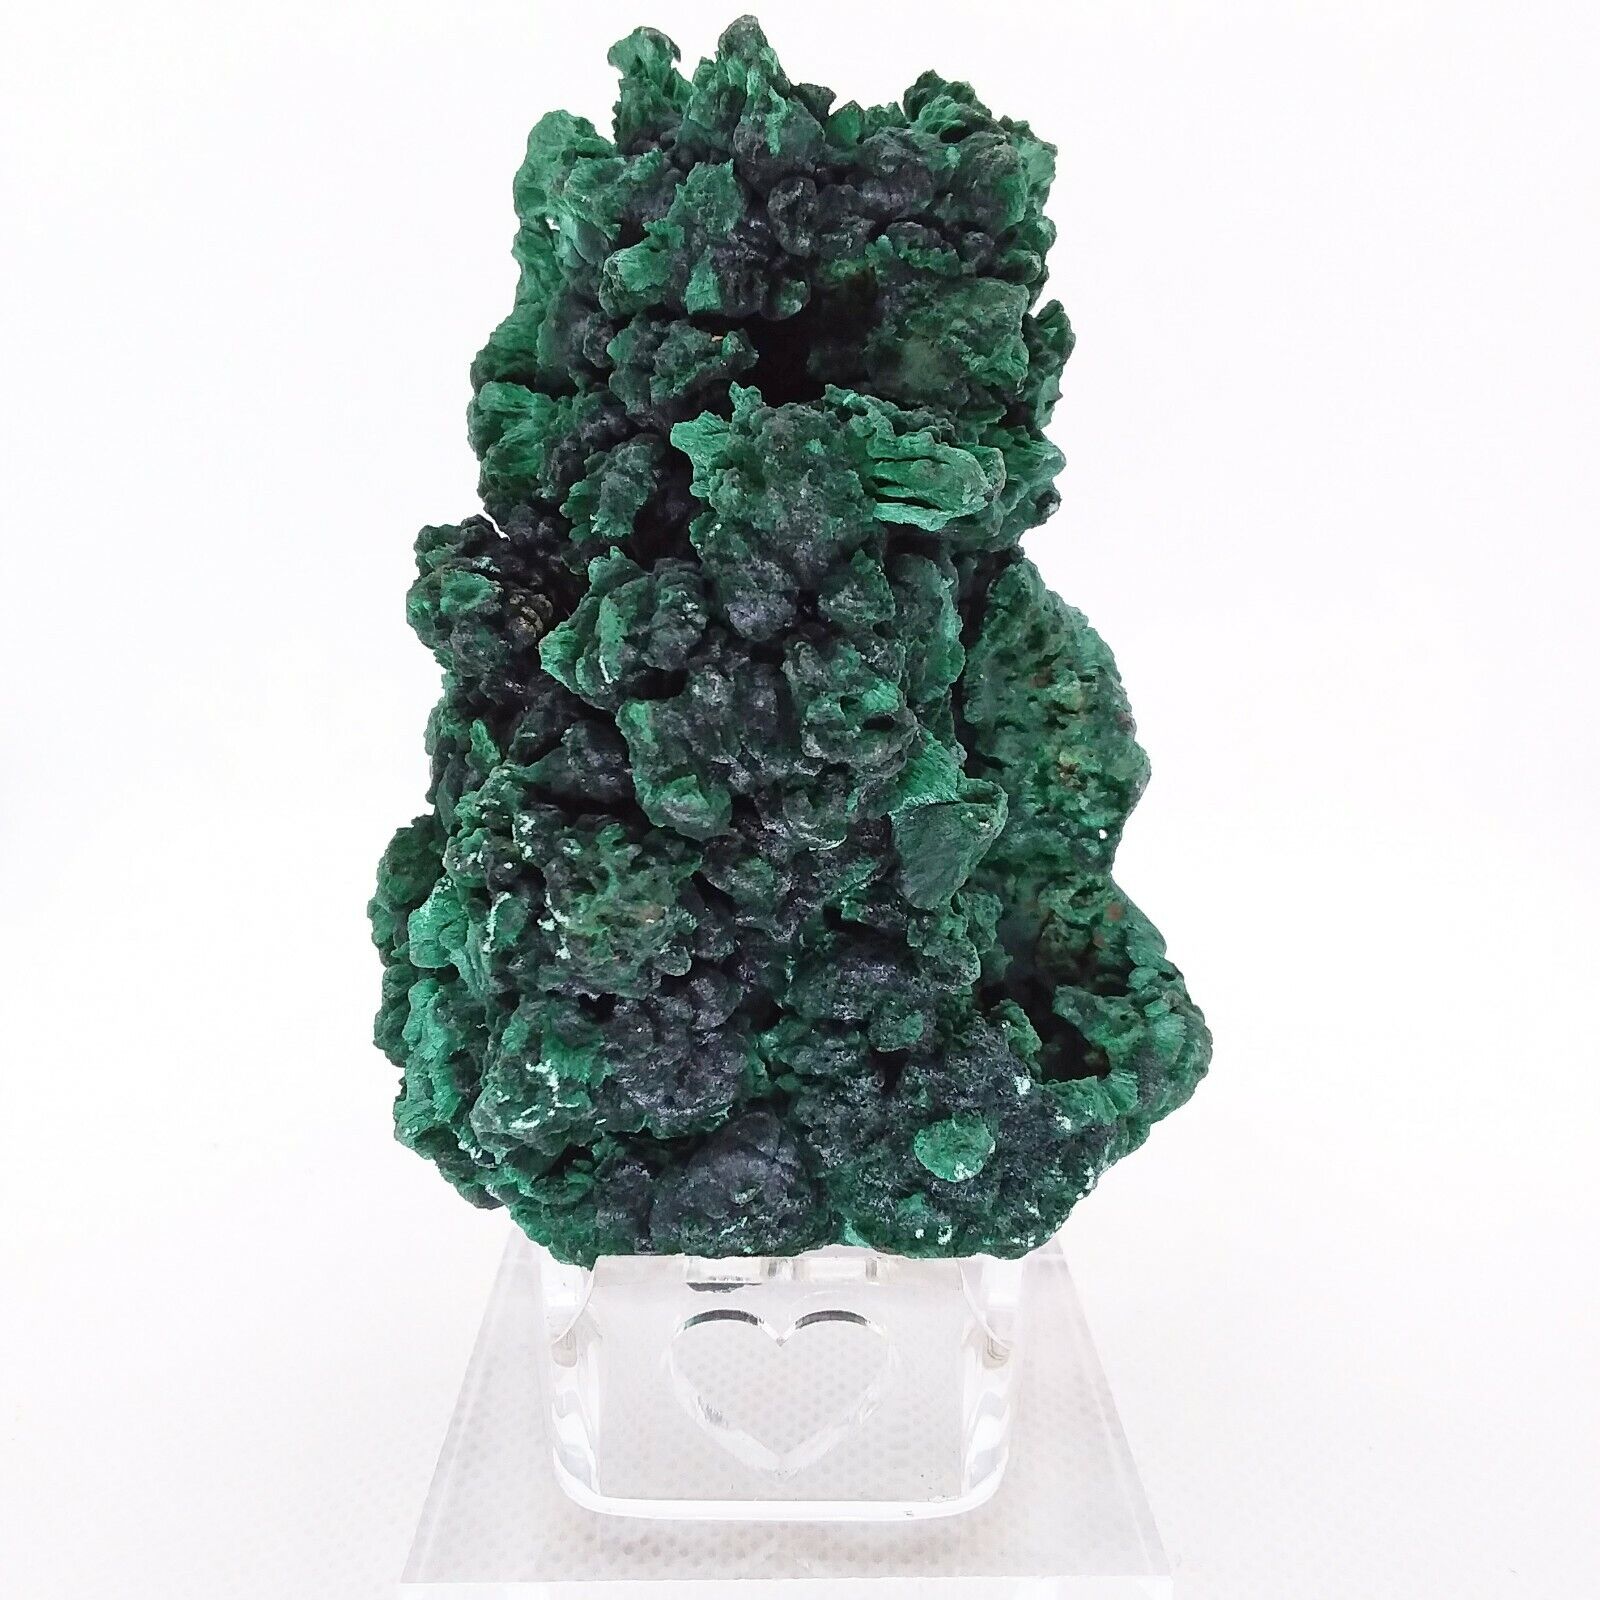 Malachite, fibrous, plumes, natural, specimen, display, mineral, green, #R-2597